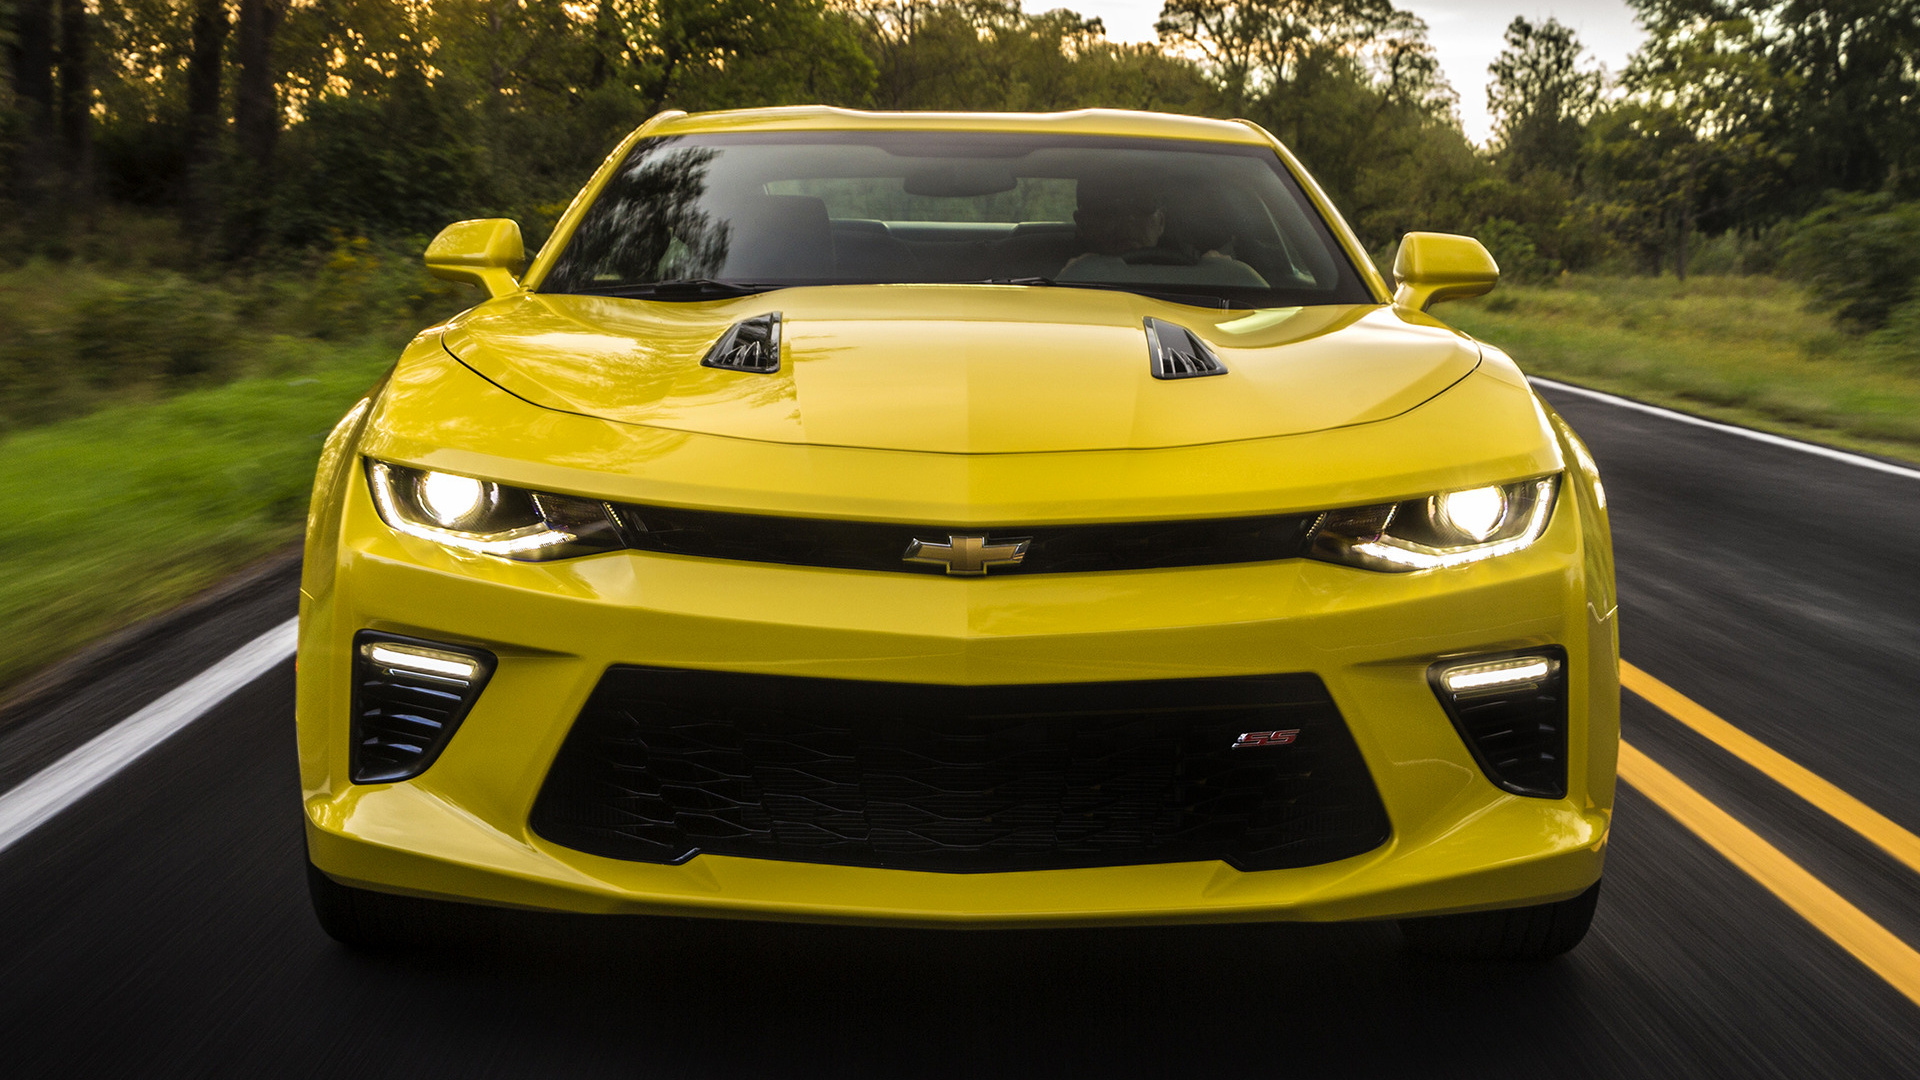 Chevrolet Camaro SS 2016 Wallpapers and HD Images   Car